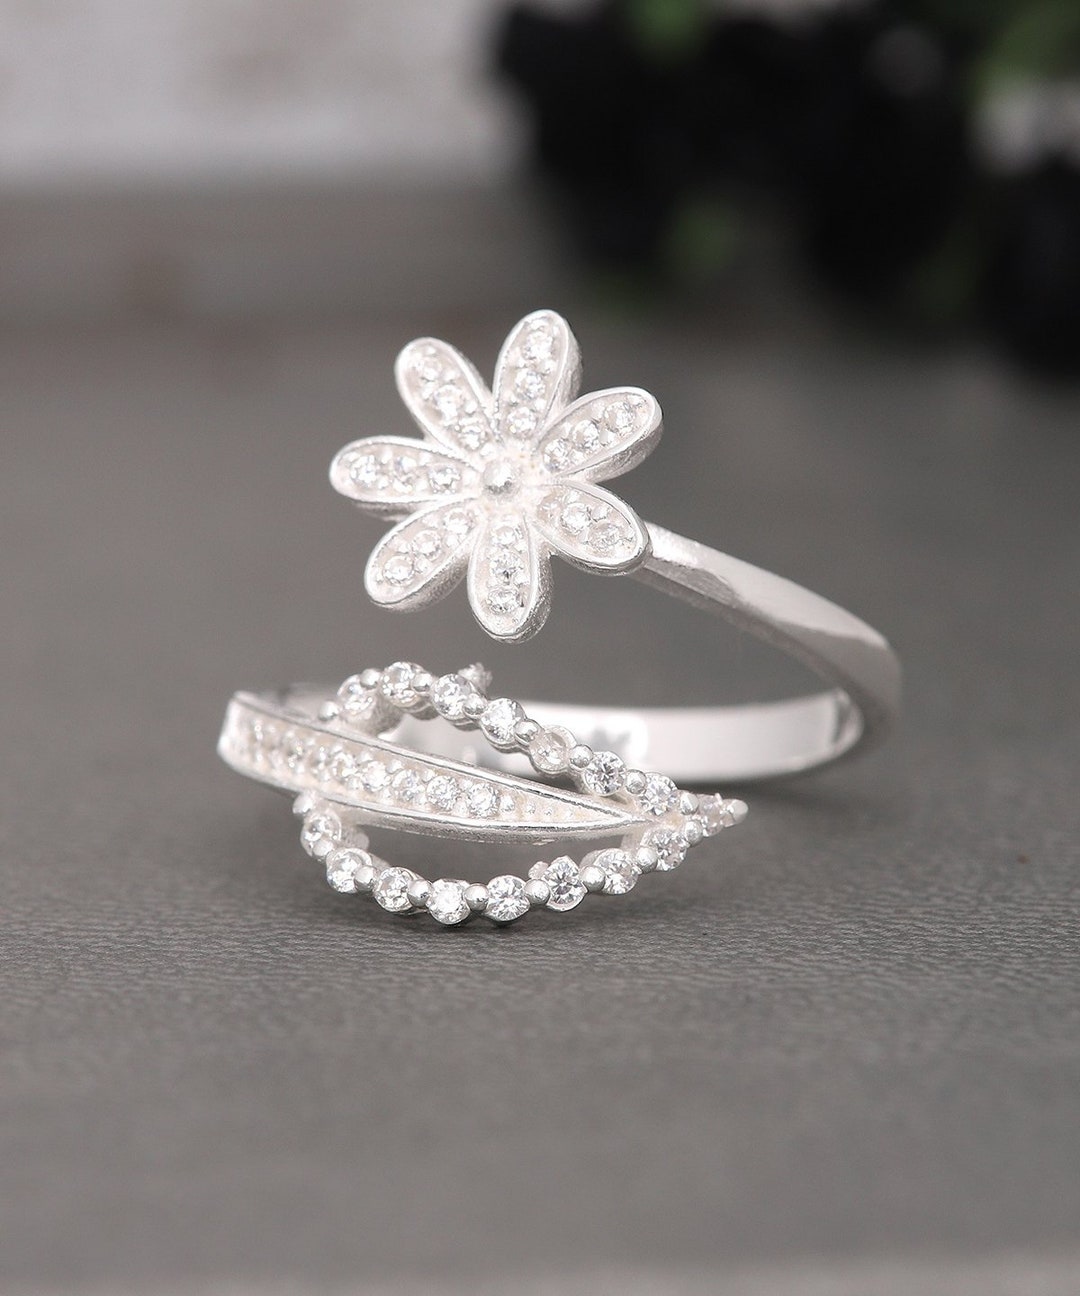 Flower Adjustable - Sterling 925 Etsy Ring Gift Ring, Unique Zircon Silver Ring, Silver Ring, & Size Free Dainty